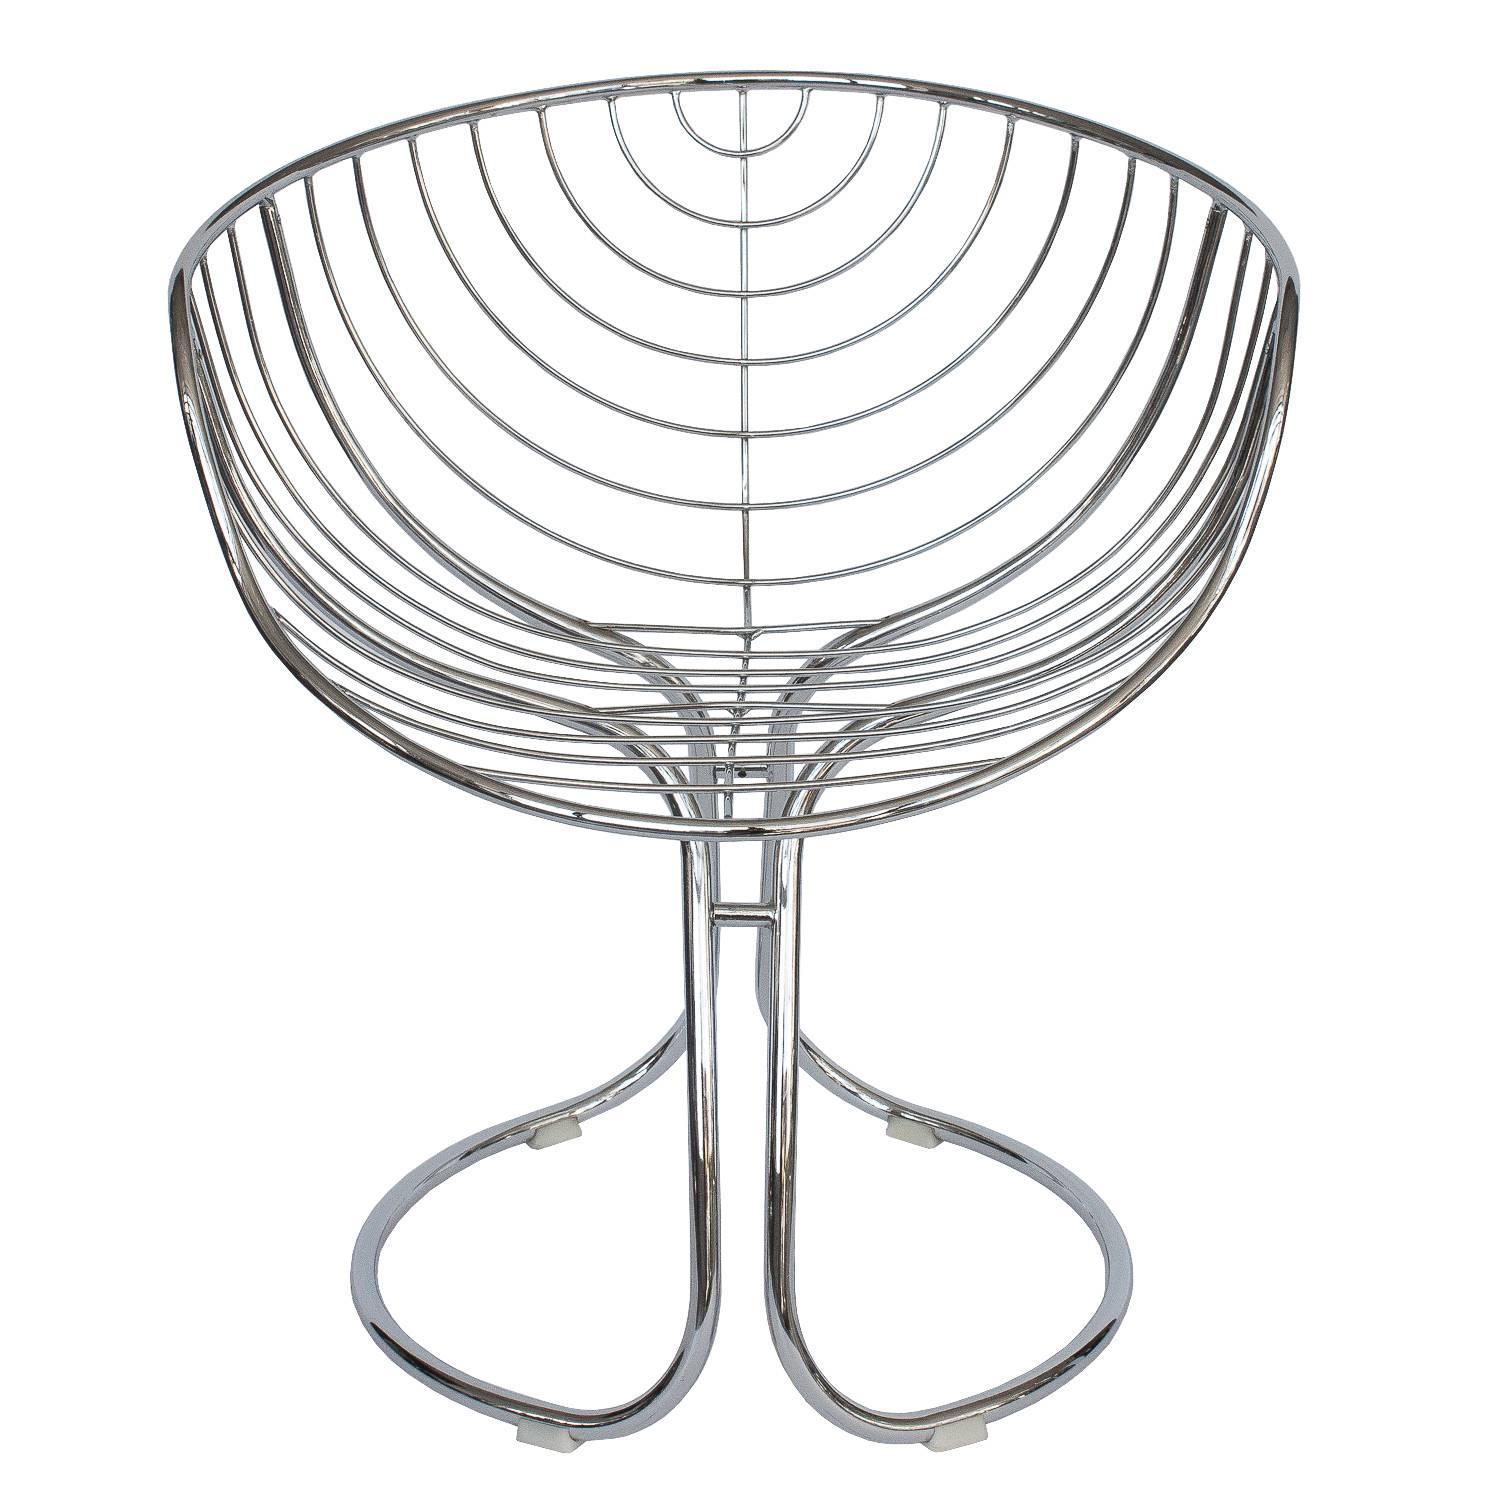 Set of six Pan Am chrome steel dining armchairs designed for the "Pan American World Airways." The wire structure emulates the lines of the "Pan Am" logo. Original white vinyl cushion covers included. Recommended using the